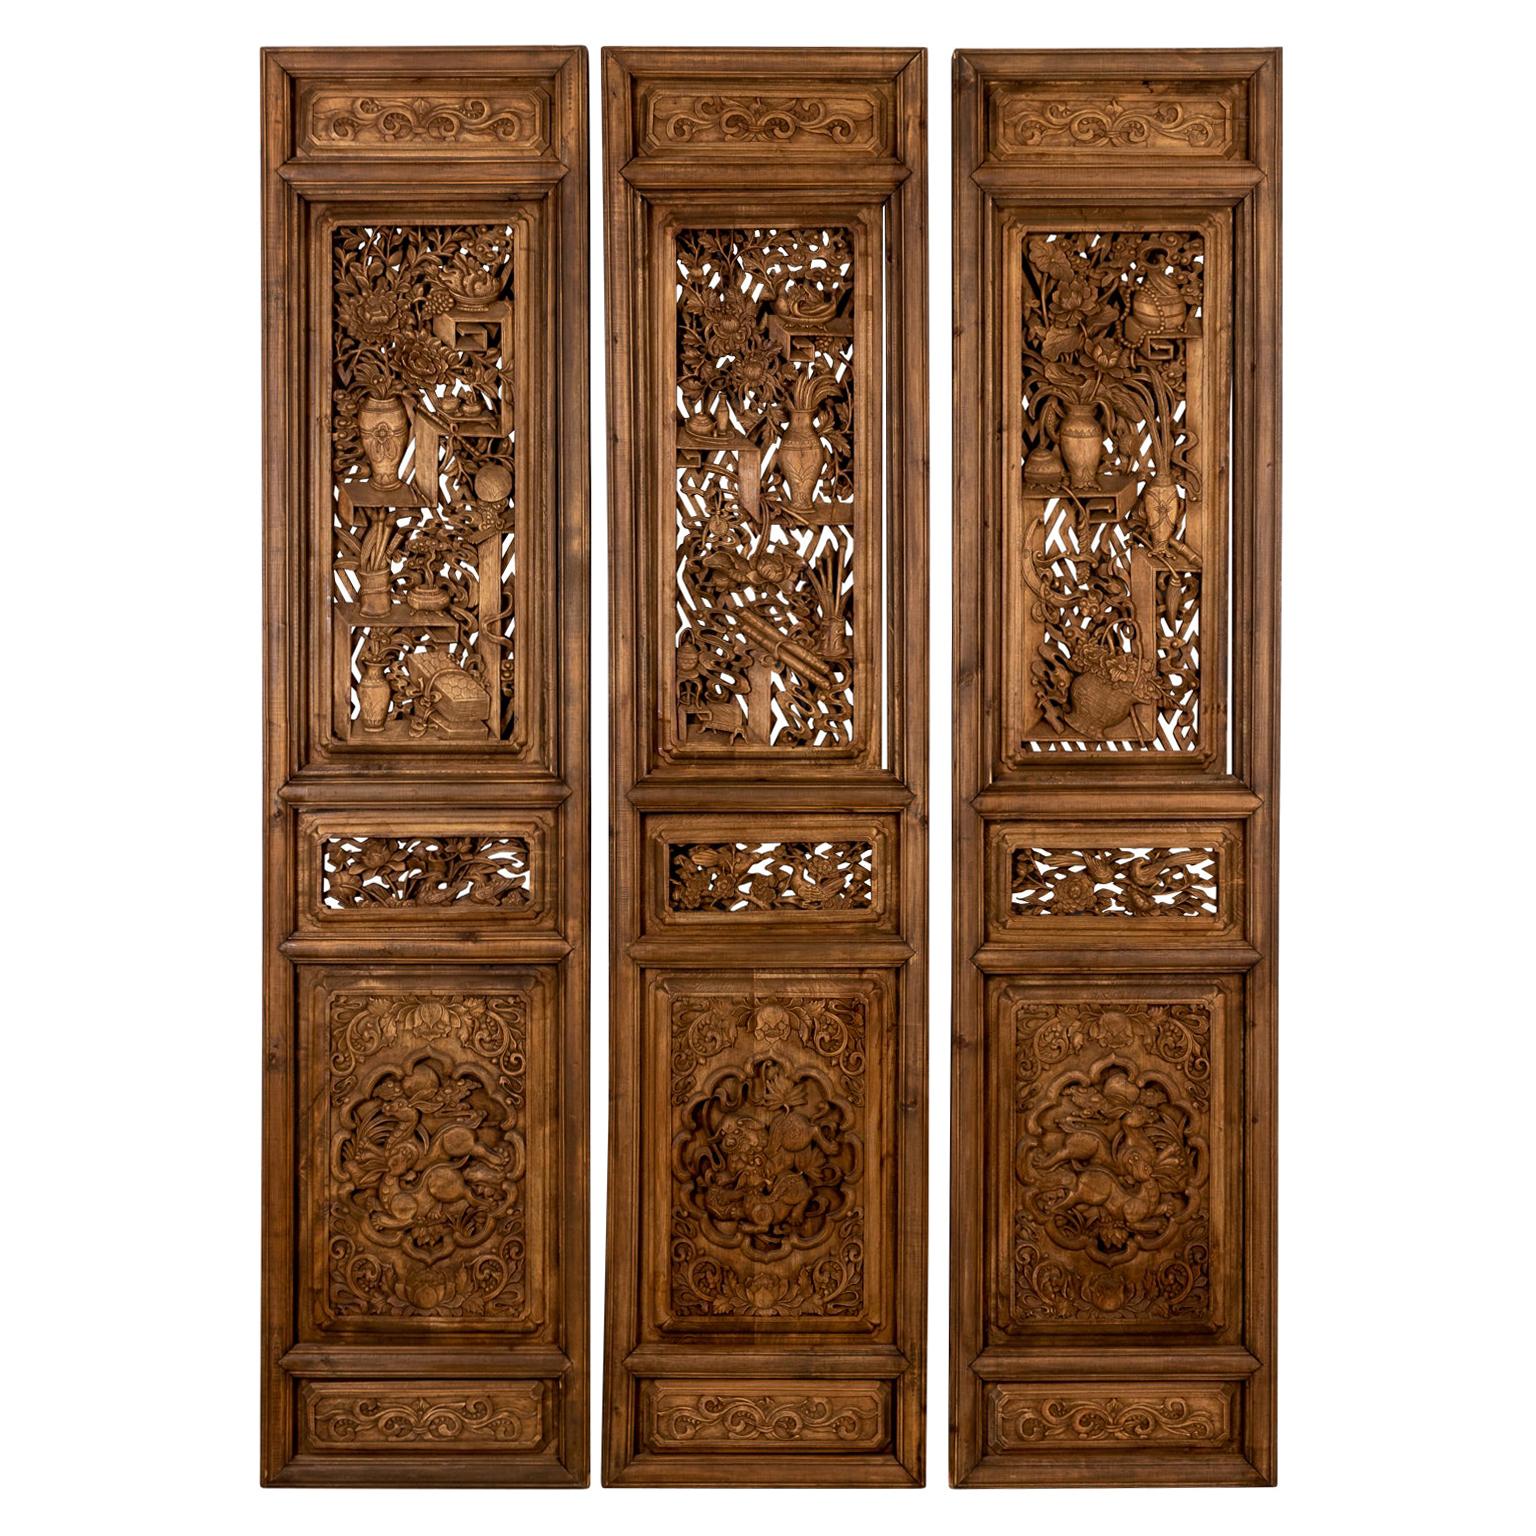 Antique Indonesian Wood Carved Panel Screens For Sale